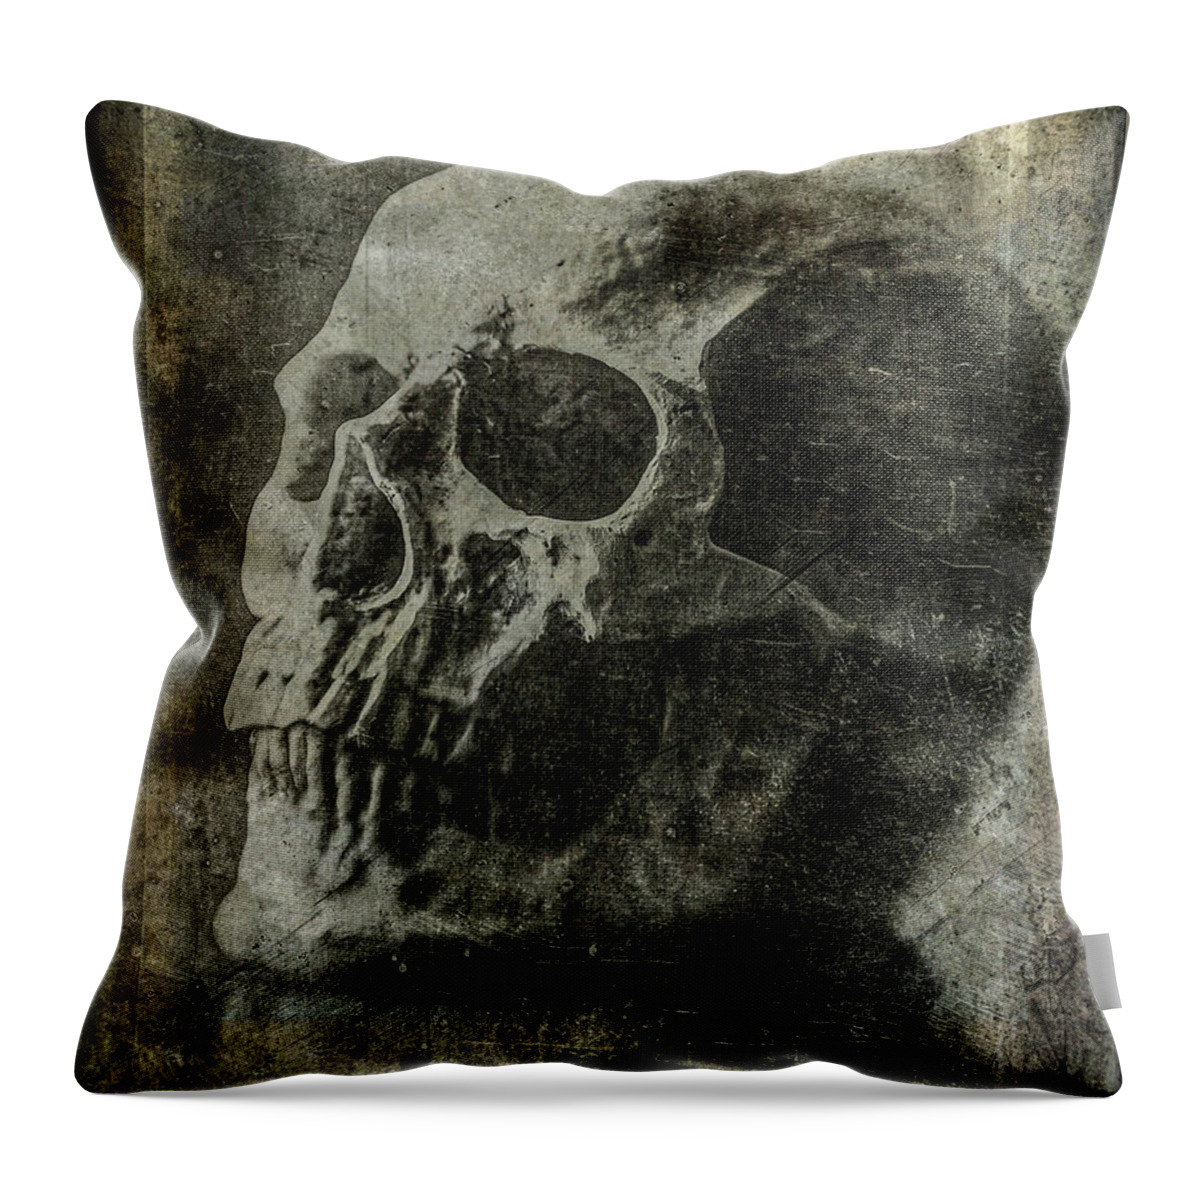 Skull Throw Pillow featuring the photograph Macabre Skull 3 by Roseanne Jones